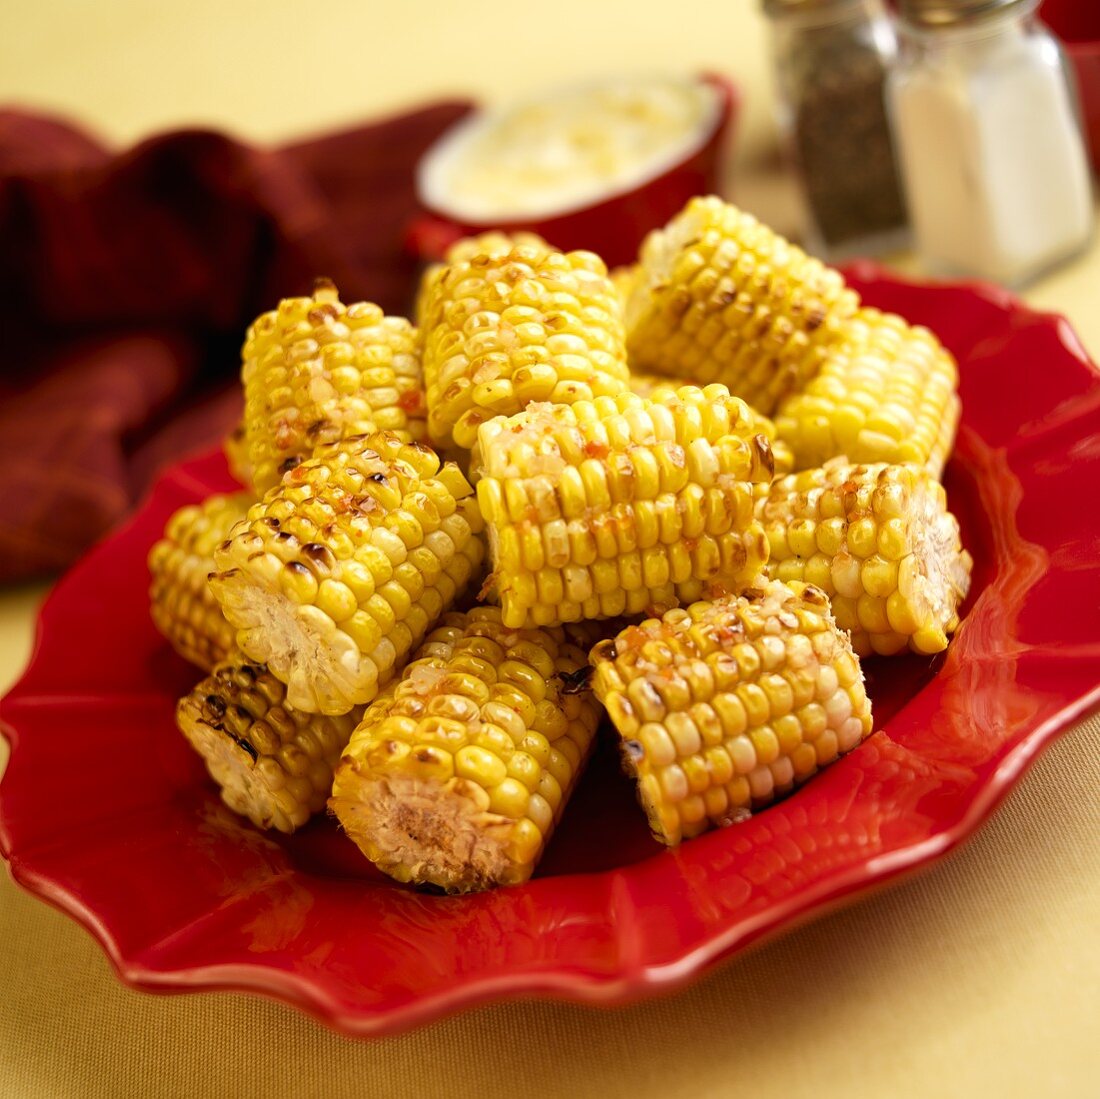 Grilled Corn on the Cob on Red Plate